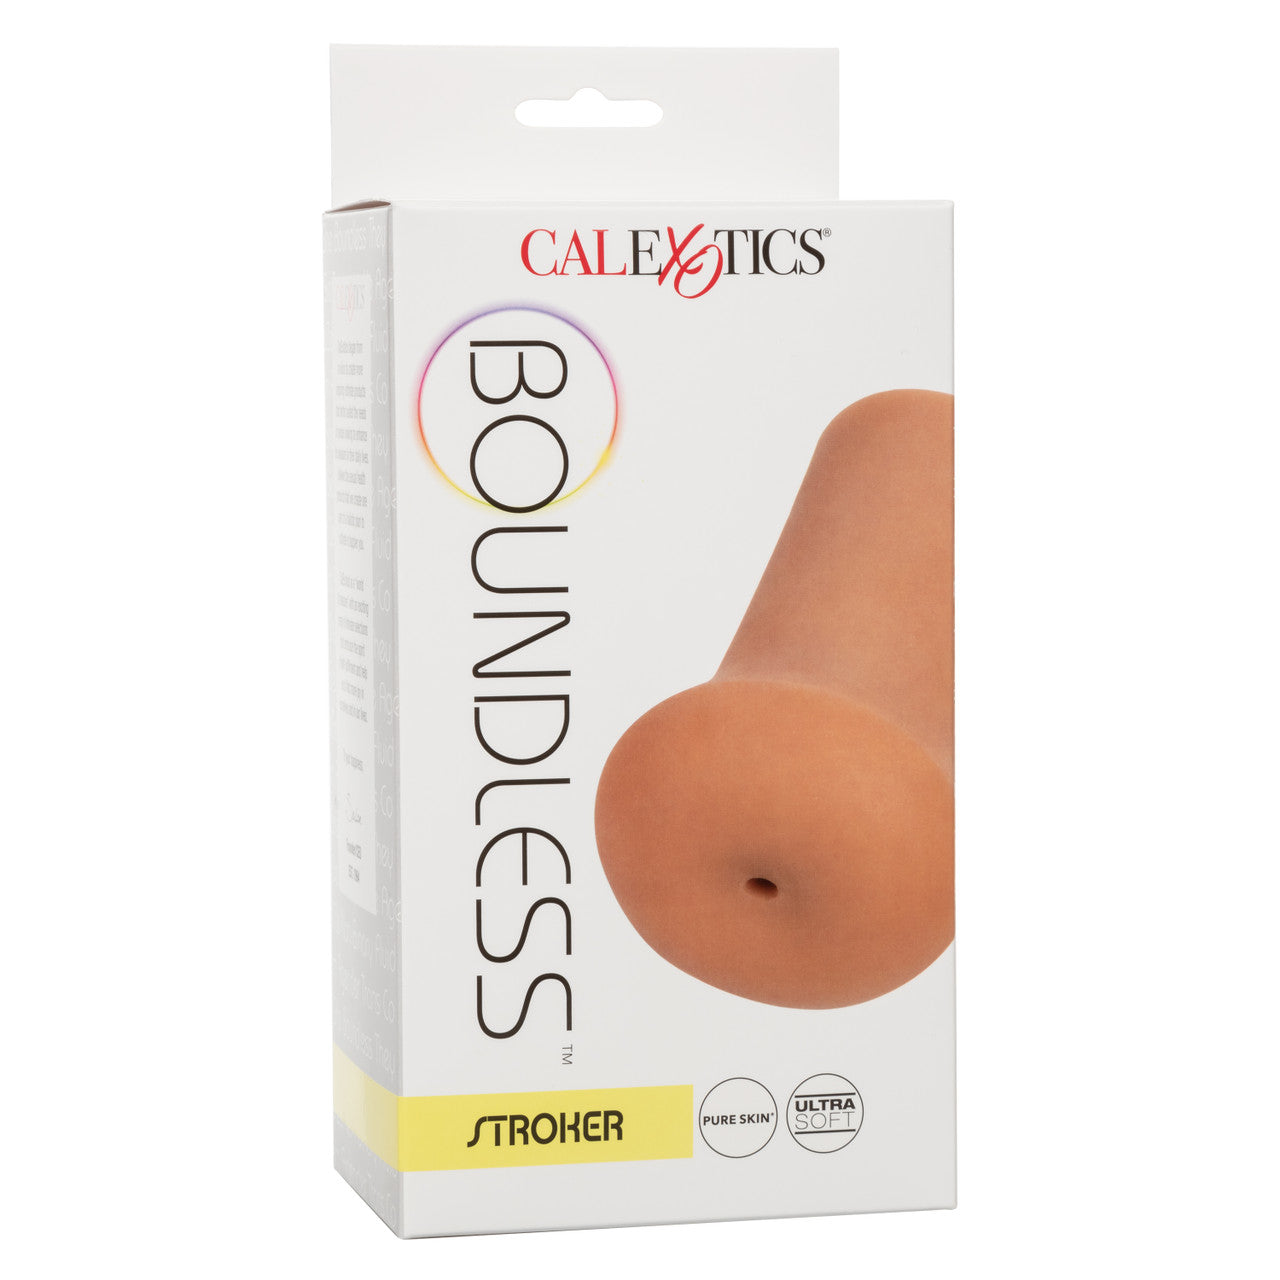 Boundless Neutral Pocket Pussy Stroker - Brown